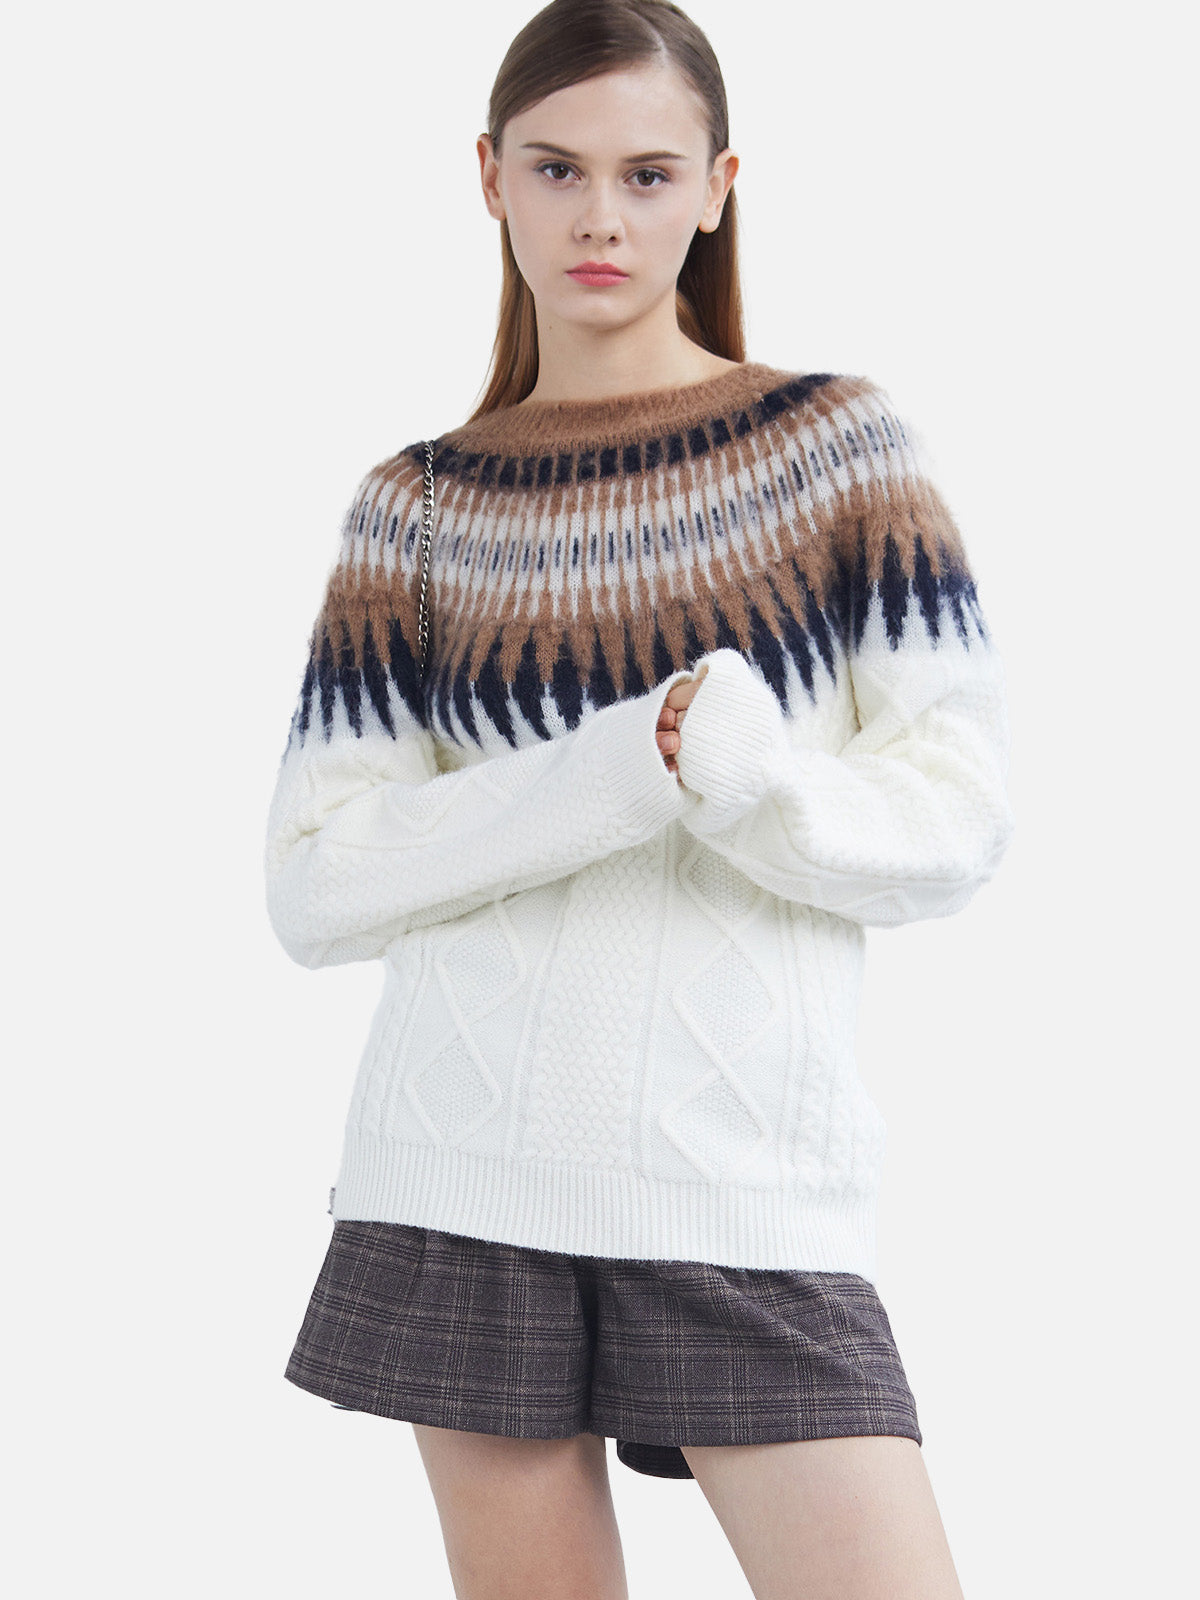 Retro Round Neck Contrast Color Loose Long-Sleeved Sweater